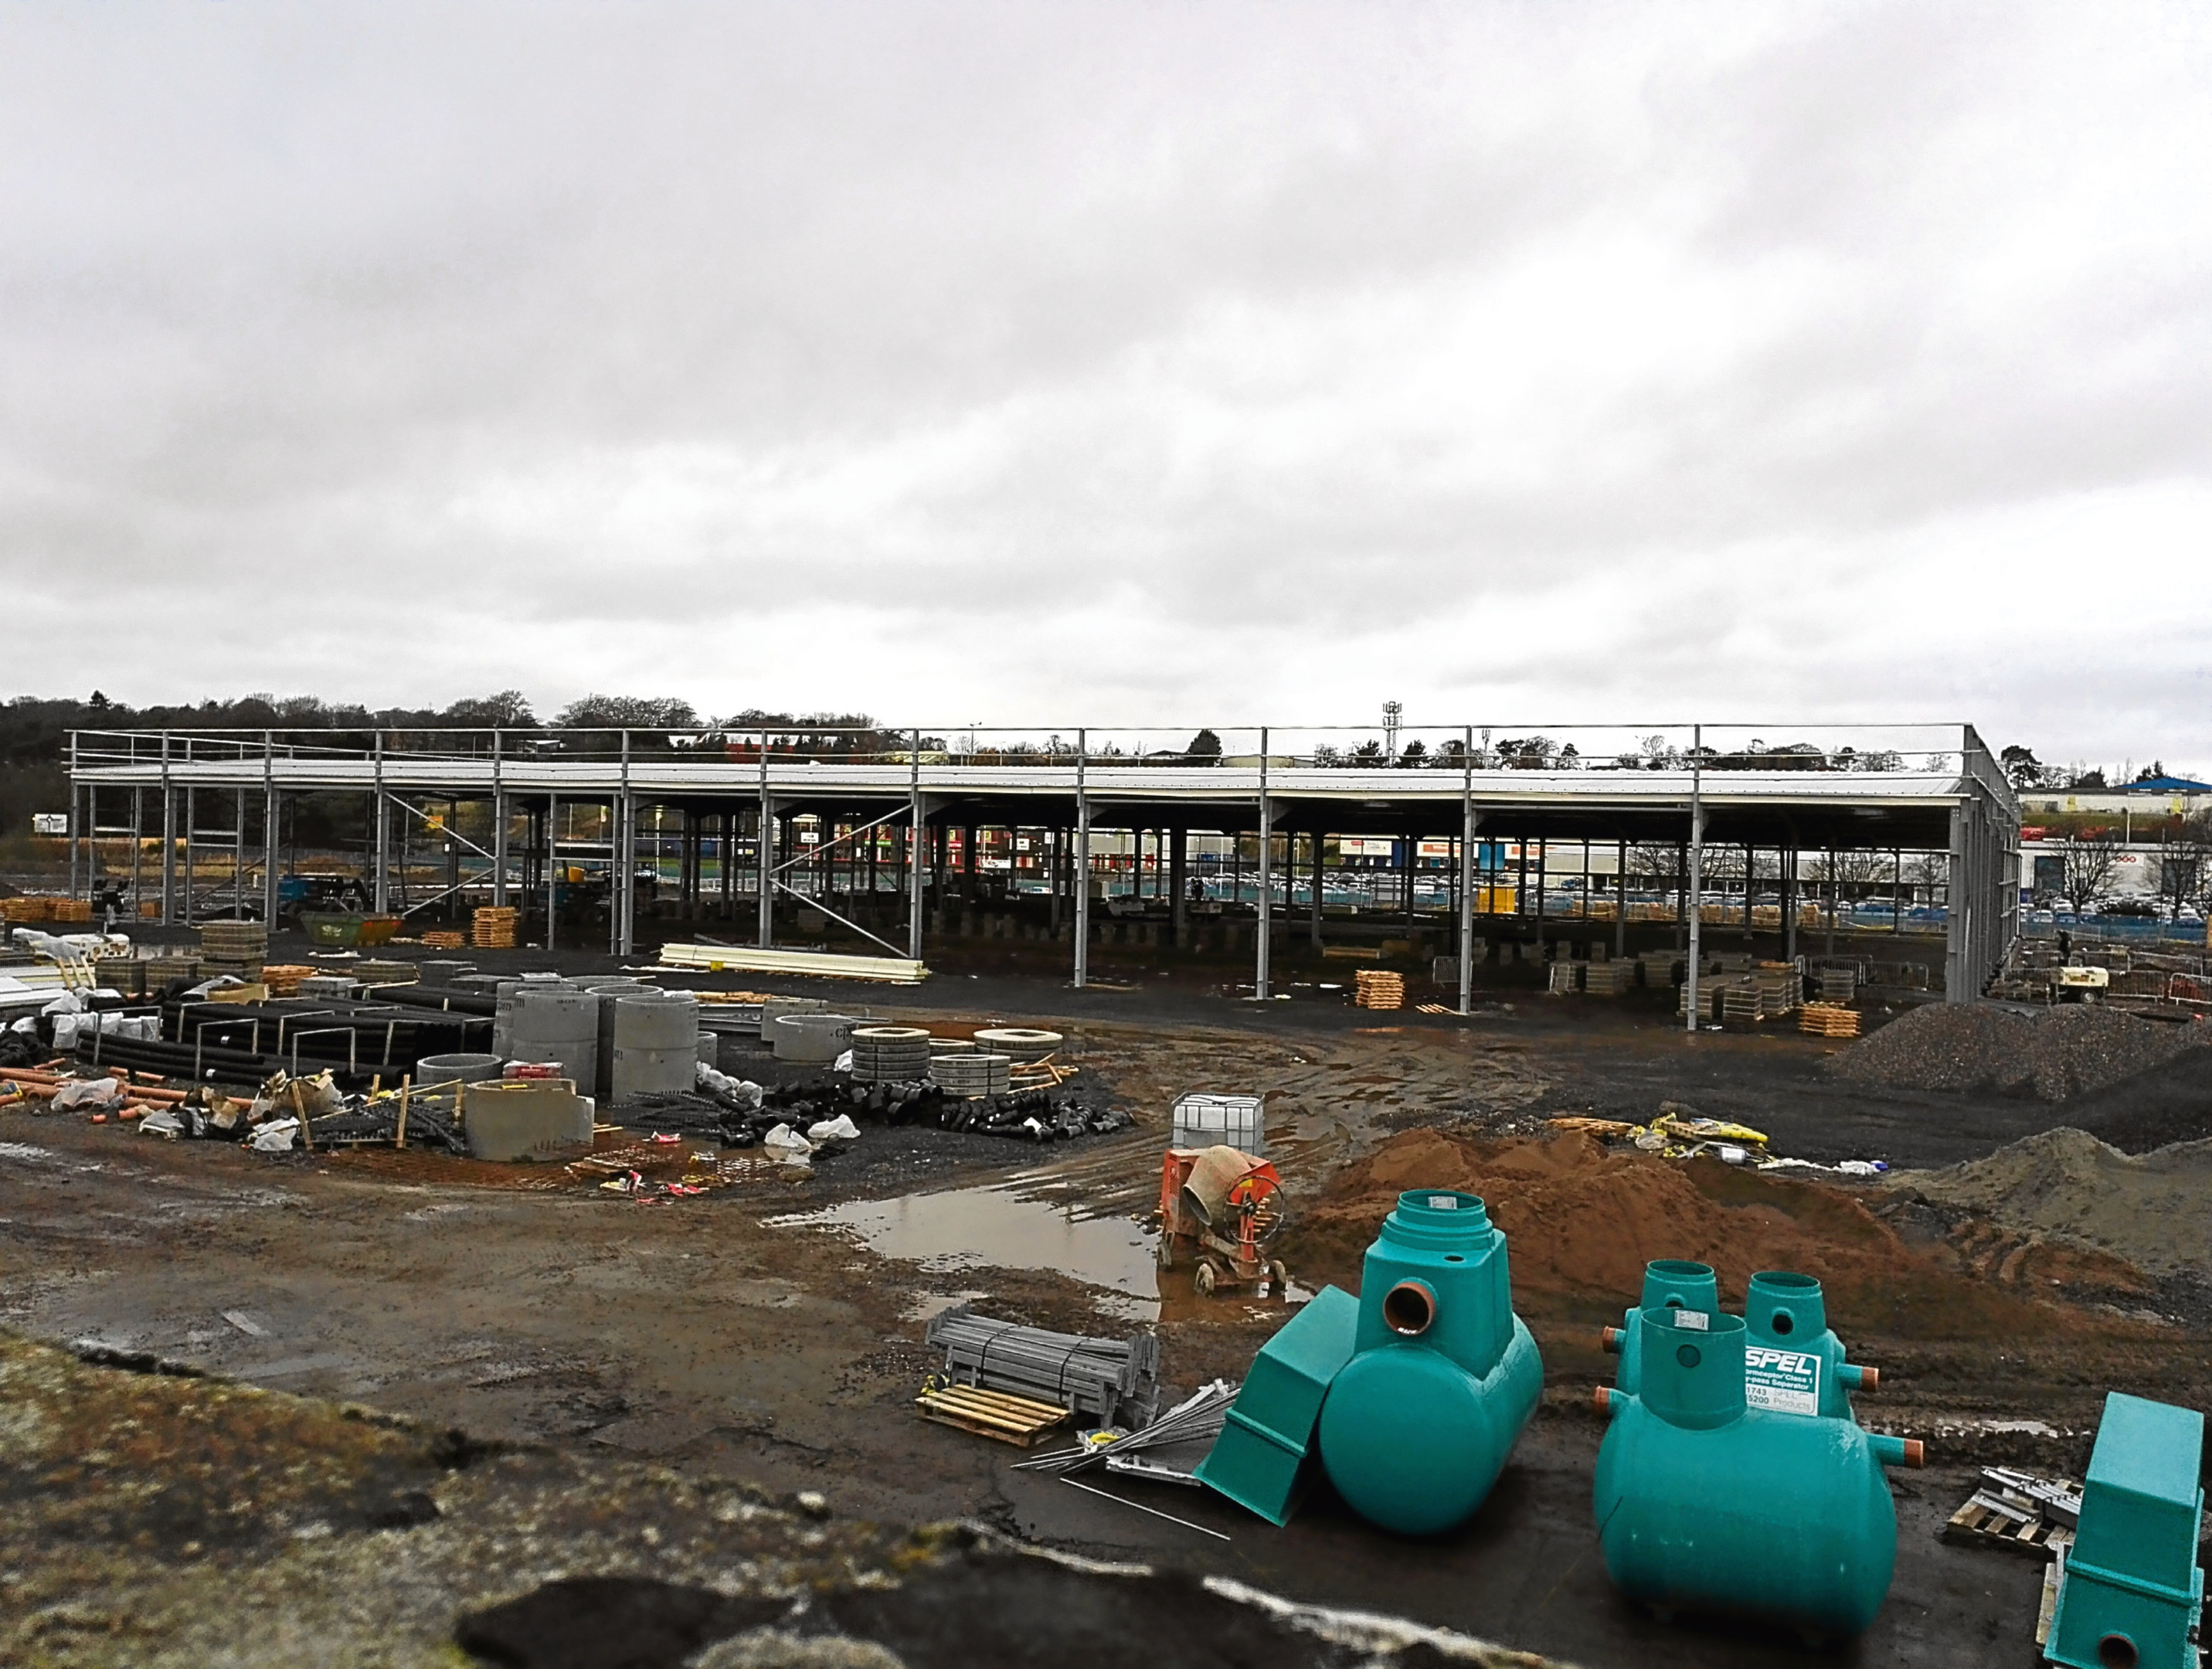 Progress on Peter Vardy's new multi-million pound CarStore development in Dundee